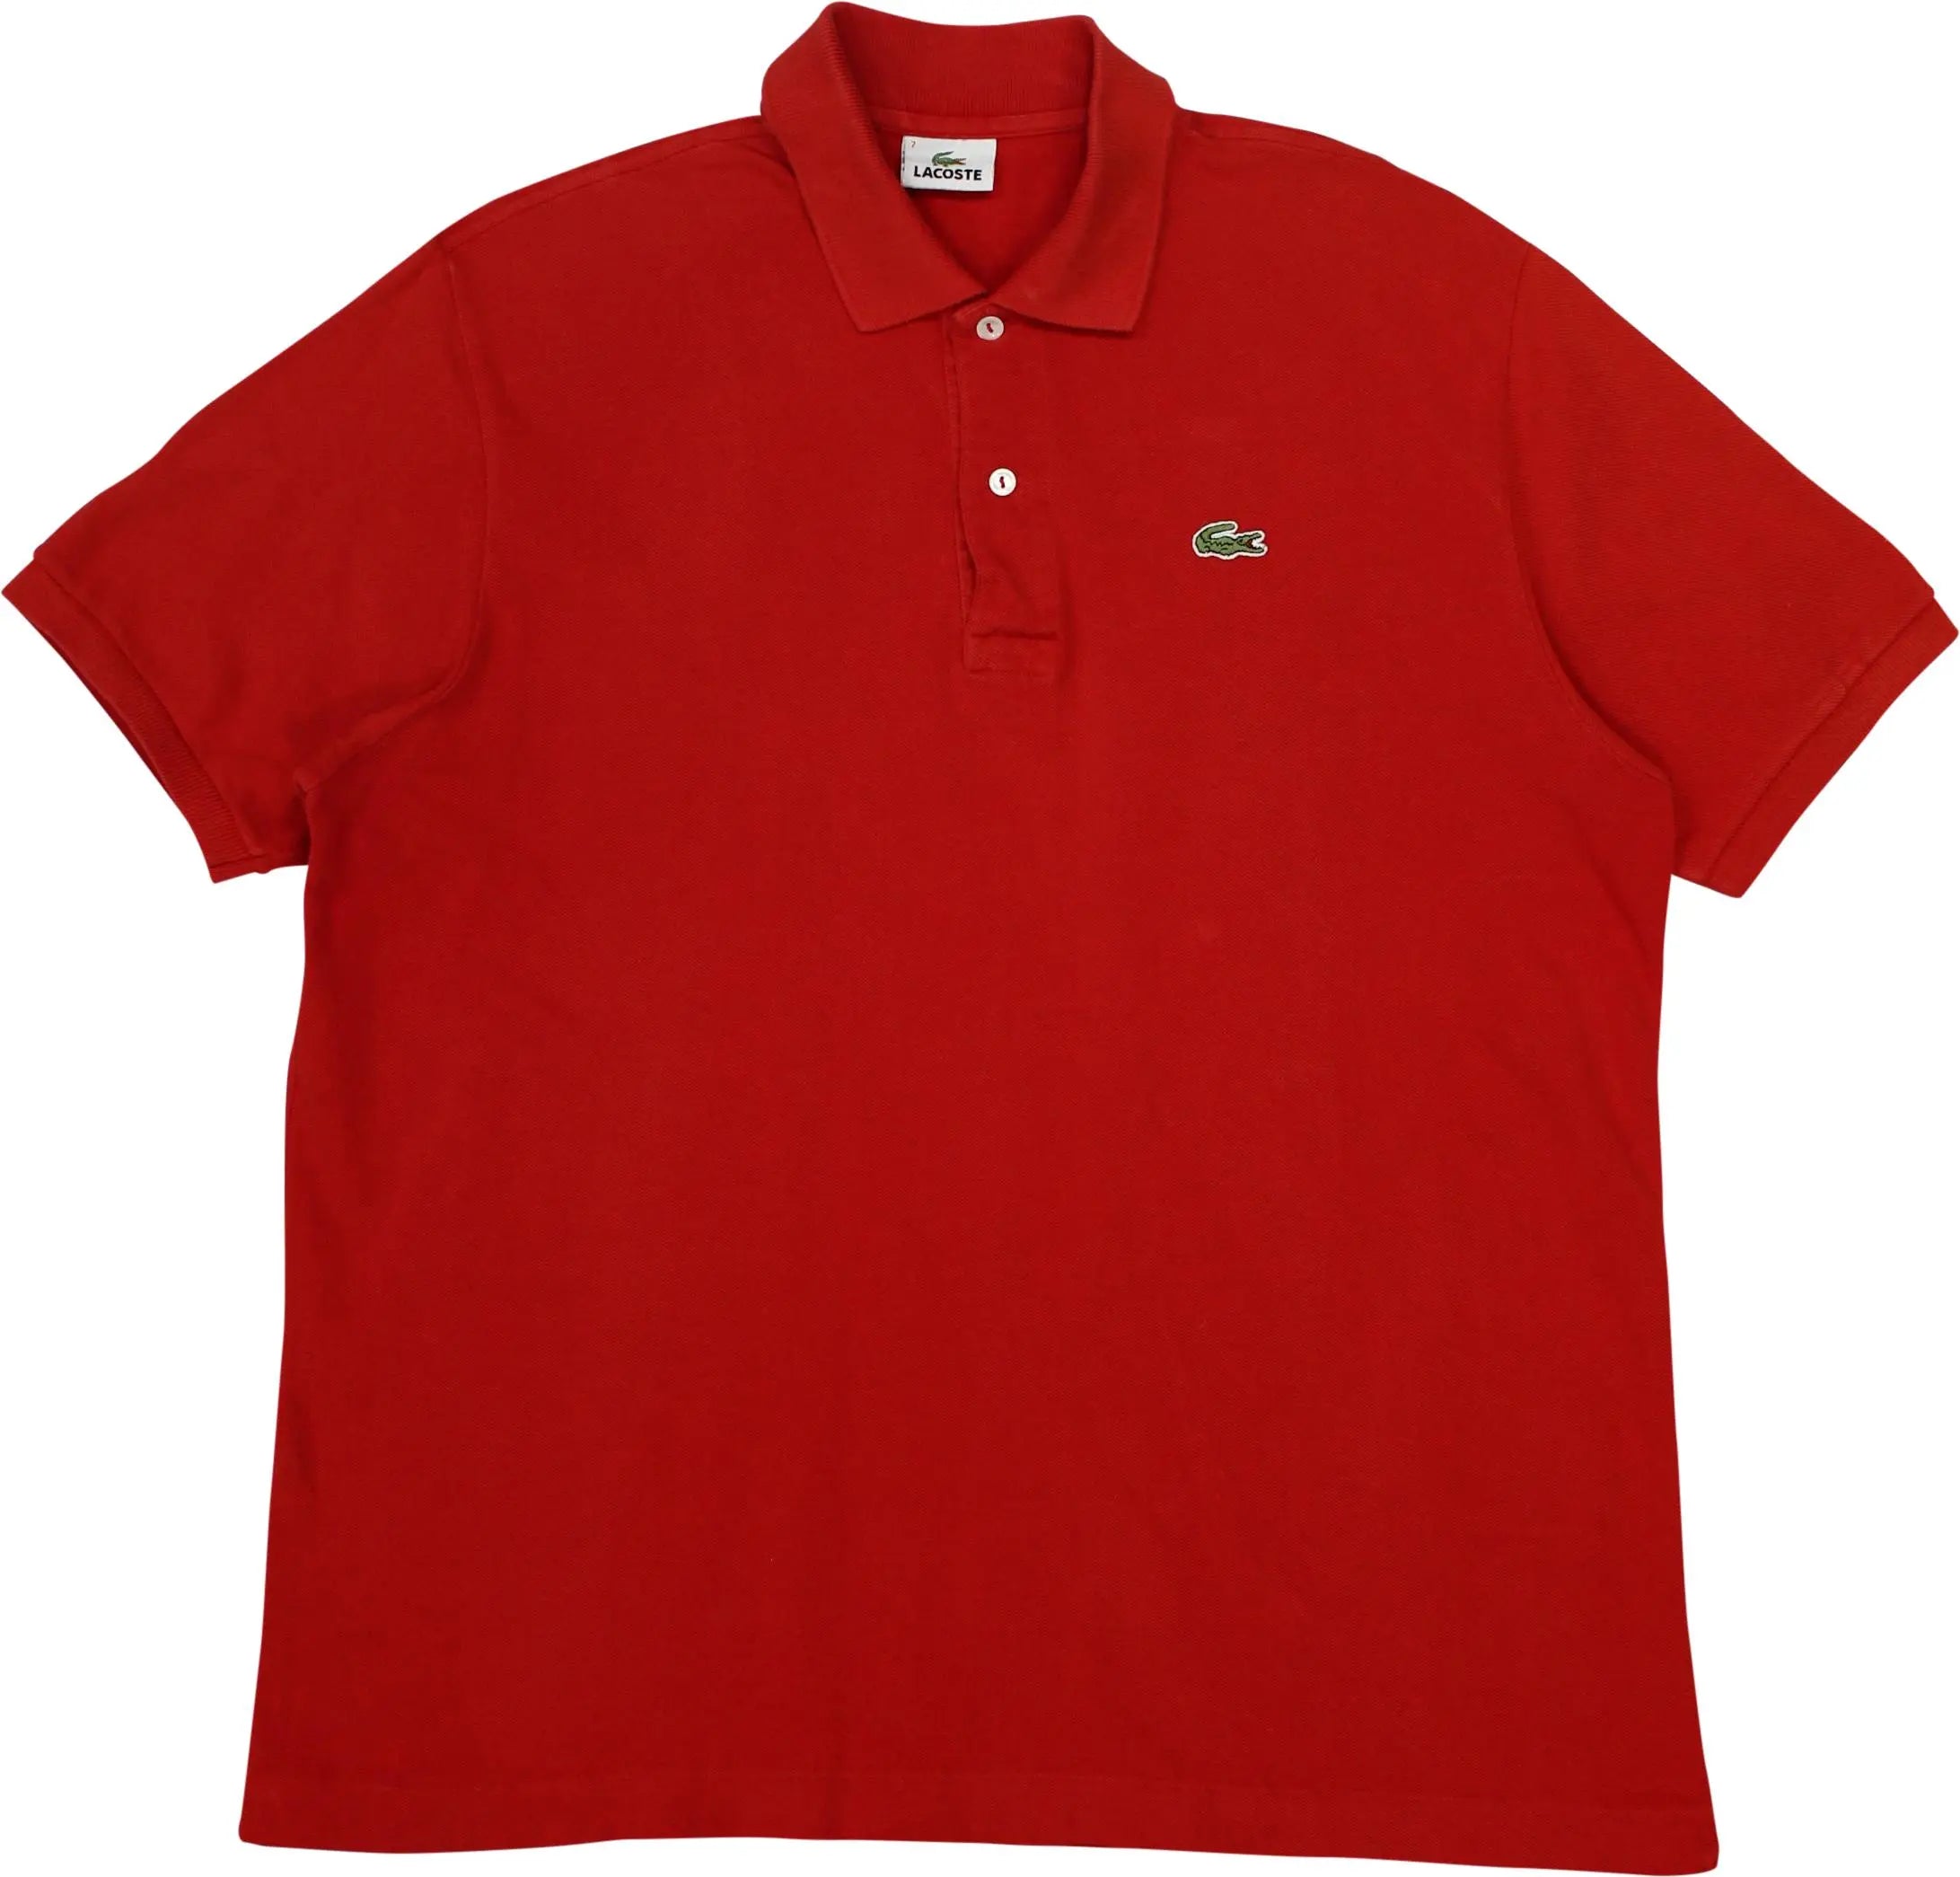 Lacoste - Red Polo Shirt by Lacoste- ThriftTale.com - Vintage and second handclothing